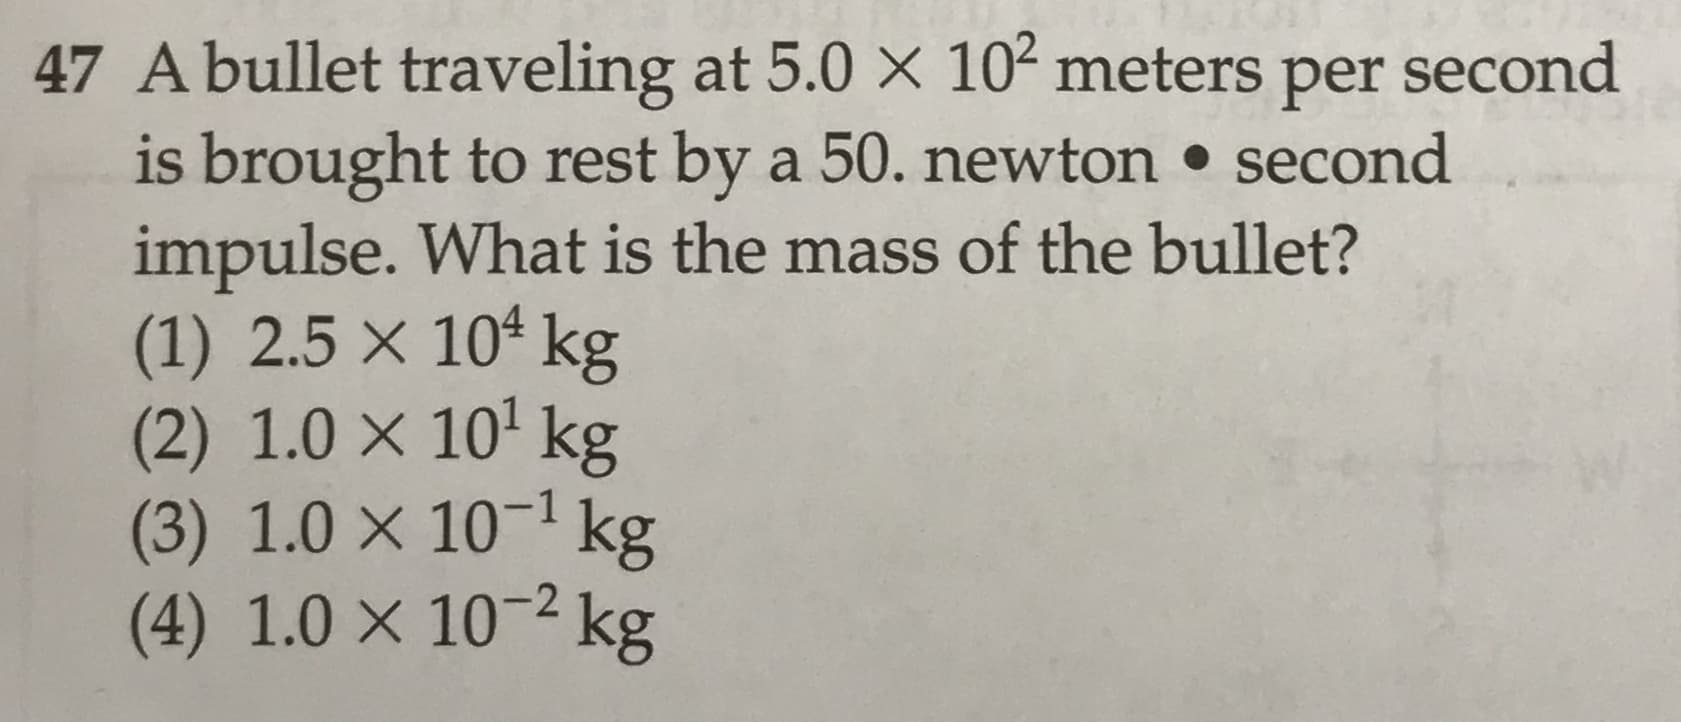 47 A bullet traveling at 5.0 X 102 meters per second
is brought to rest by a 50. newton • second
impulse. What is the mass of the bullet?
(1) 2.5 × 10ª kg
(2) 1.0 × 10' kg
(3) 1.0 × 10¬1 kg
(4) 1.0 × 10-² kg
